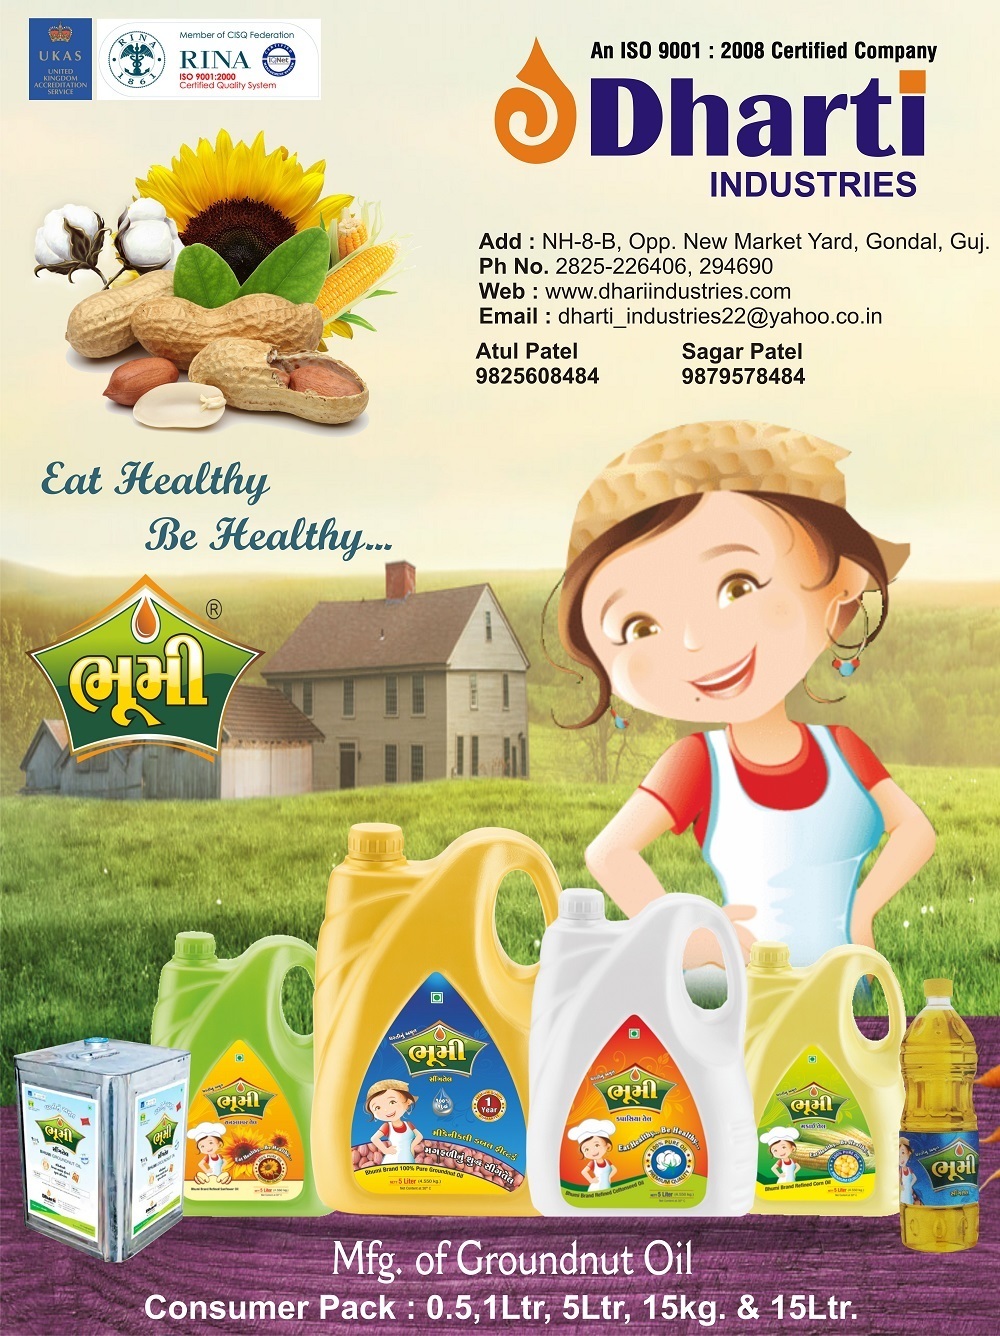 Dharti Industries - Manufacturer Of Groundnut Oil